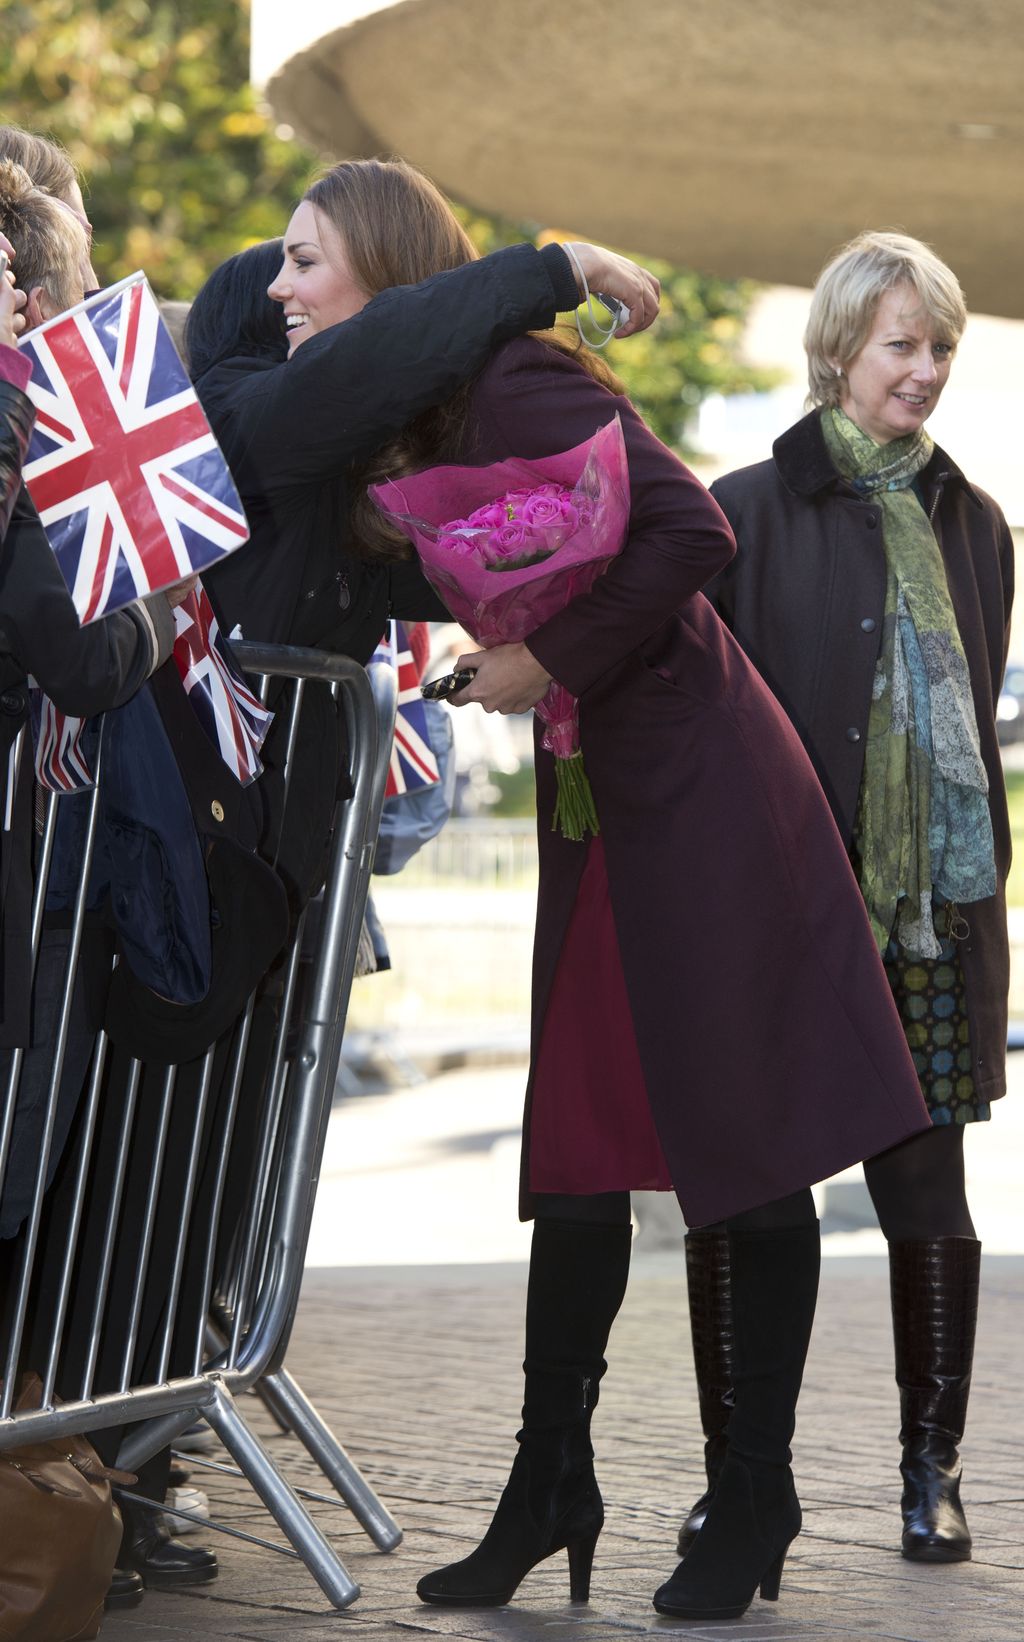 NEWCASTLE UPON TYNE, ENGLAND - OCTOBER 10: Catherine, Duchess of Cambridge hugs a well-wisher as she visits Newcastle Civic Centre, on October 19, 2012 in Newcastle Upon Tyne, United Kingdom. (Photo by Paul Edwards - WPA Pool/Getty Images)